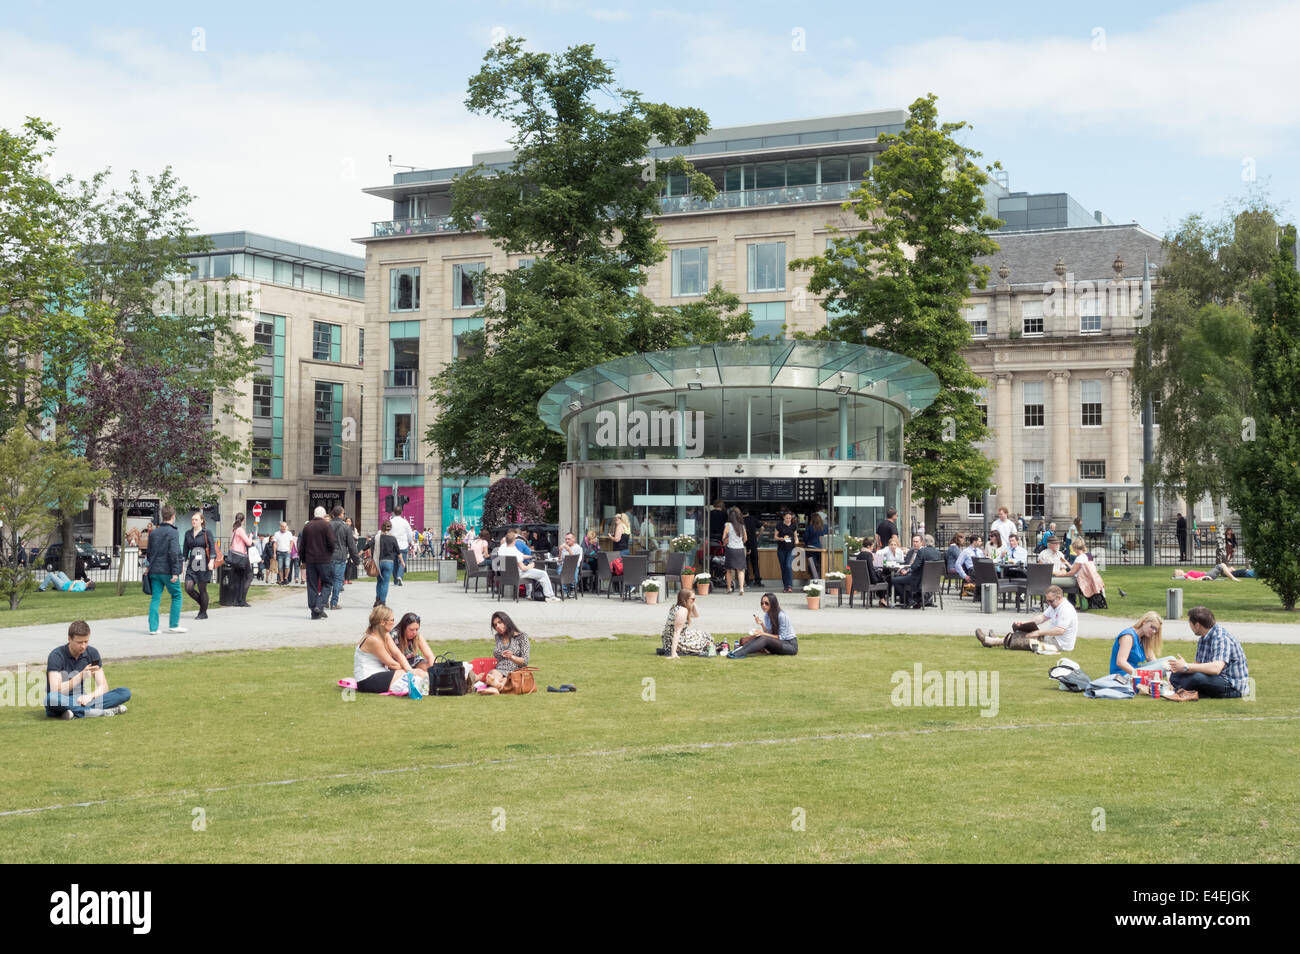 People enjoying the summer weather in St Andrews Square, Edinburgh Stock Photo